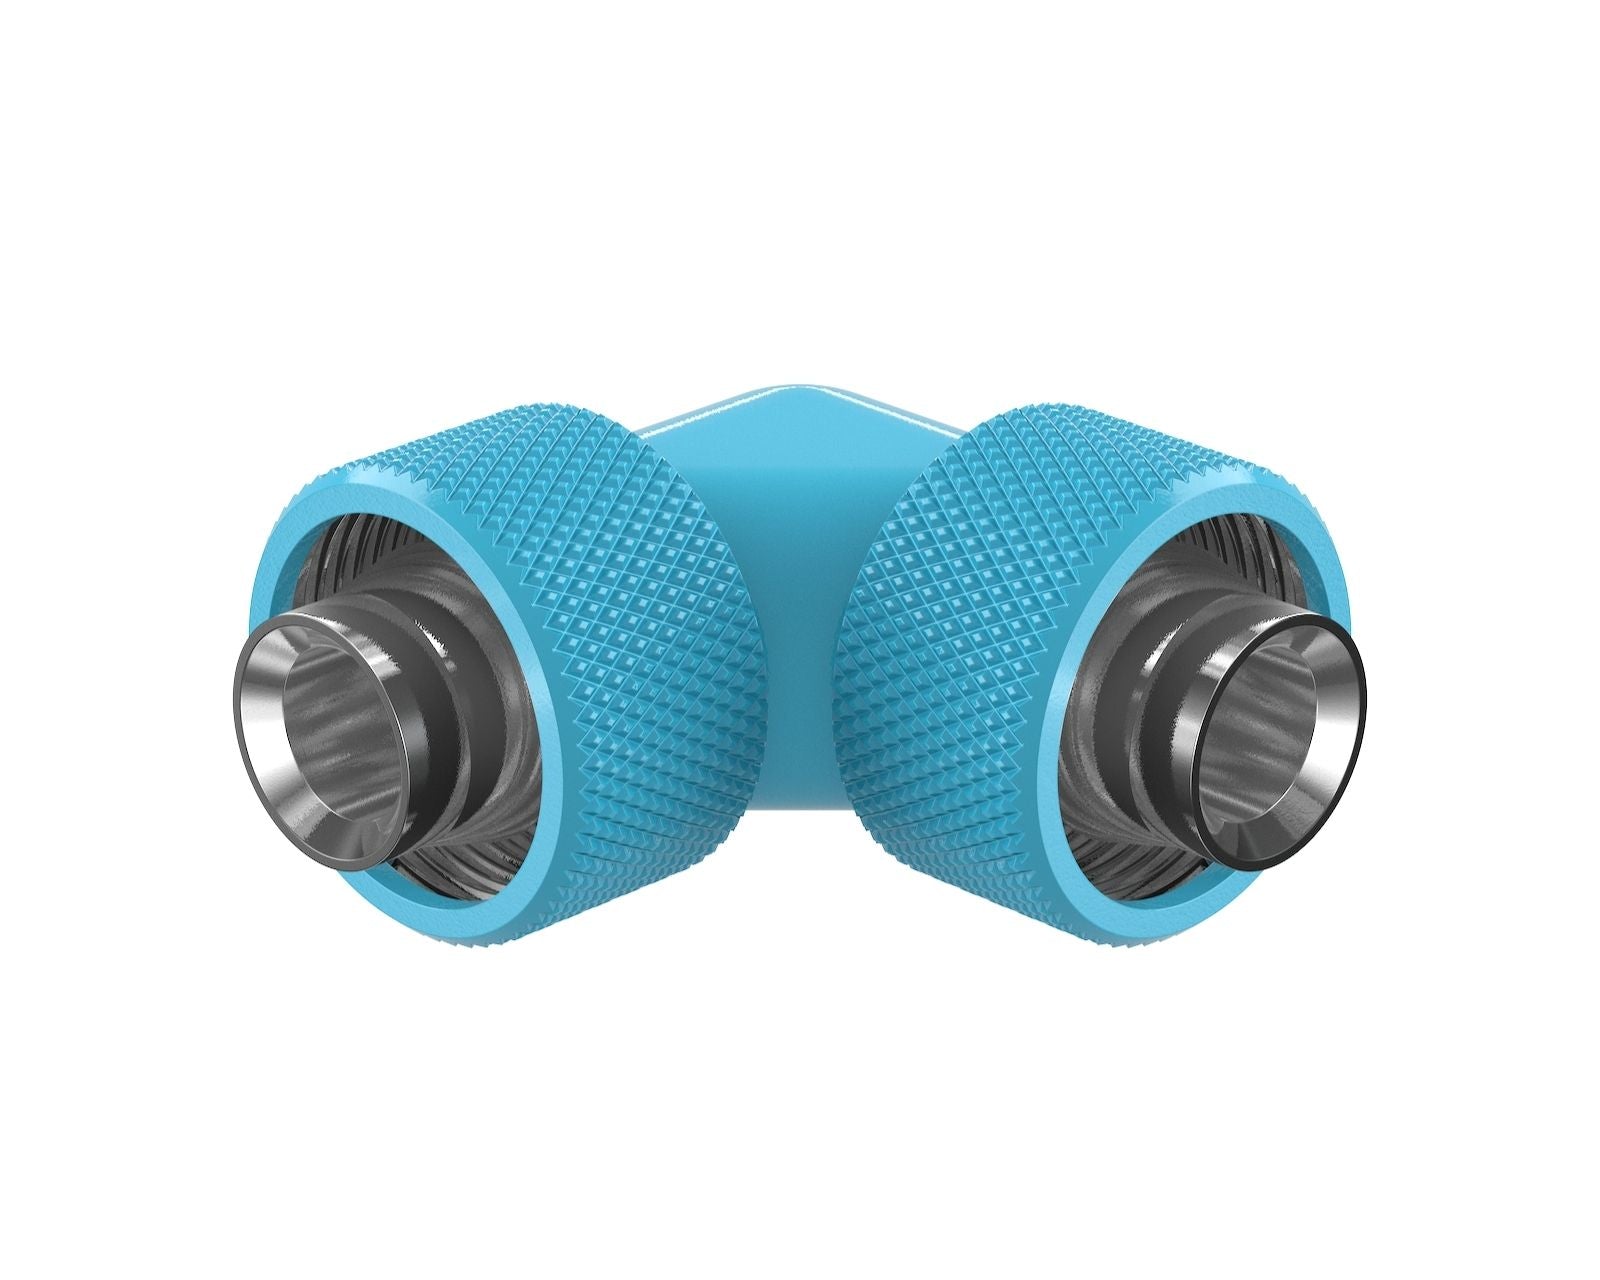 PrimoChill SecureFit SX - Premium 90 Degree Compression Fitting Set For 1/2in ID x 3/4in OD Flexible Tubing (F-SFSX3490) - Available in 20+ Colors, Custom Watercooling Loop Ready - Sky Blue